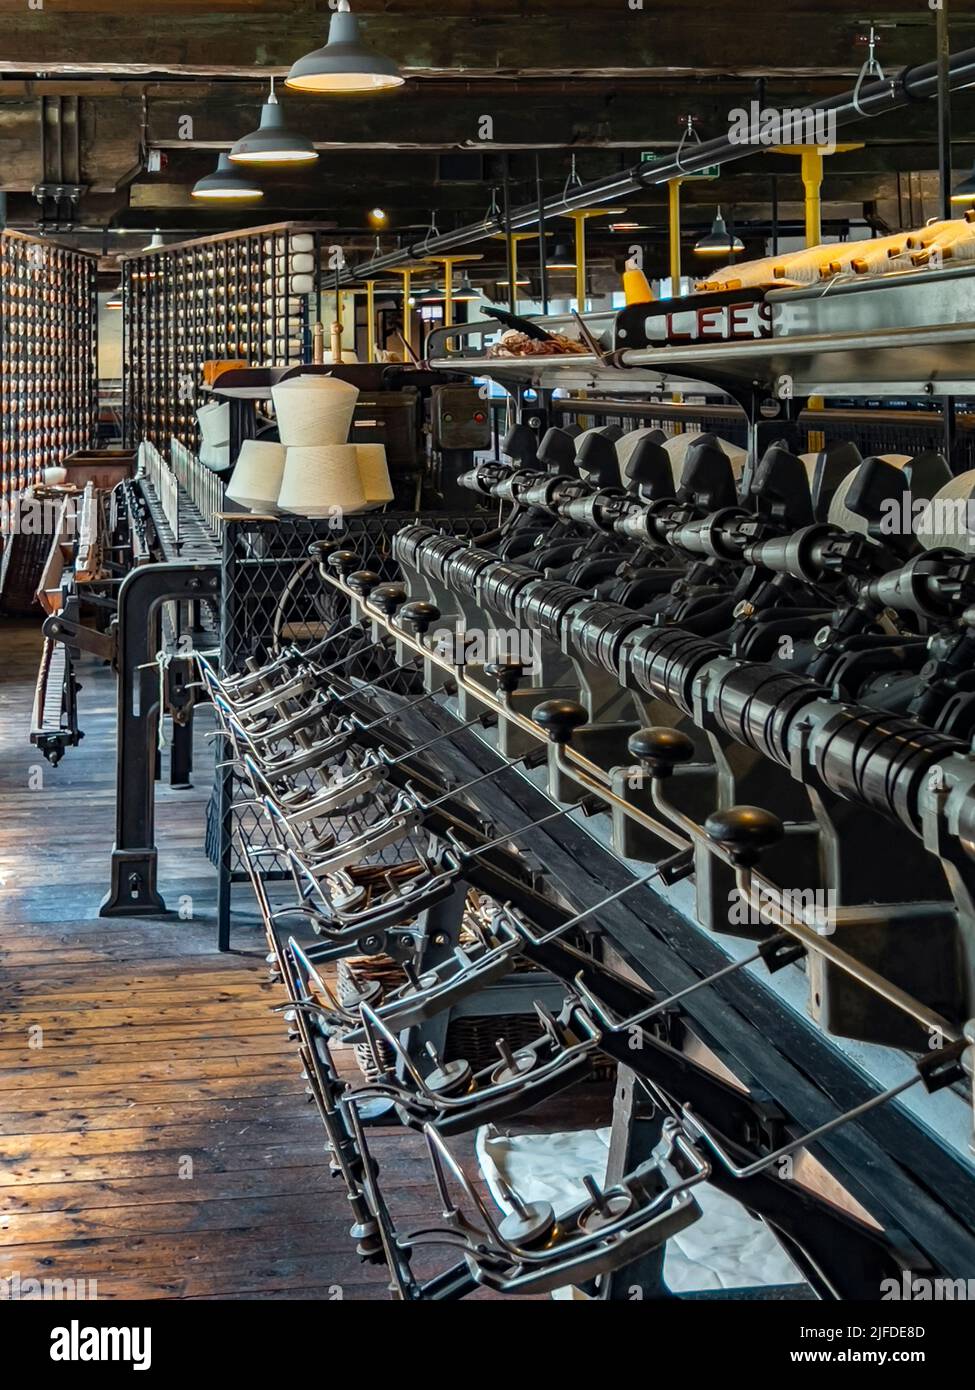 Quarry Bank Mill (also known as Styal Mill) in Styal, Cheshire, in northwest England. It is one of the best preserved textile factories of the Industr Stock Photo